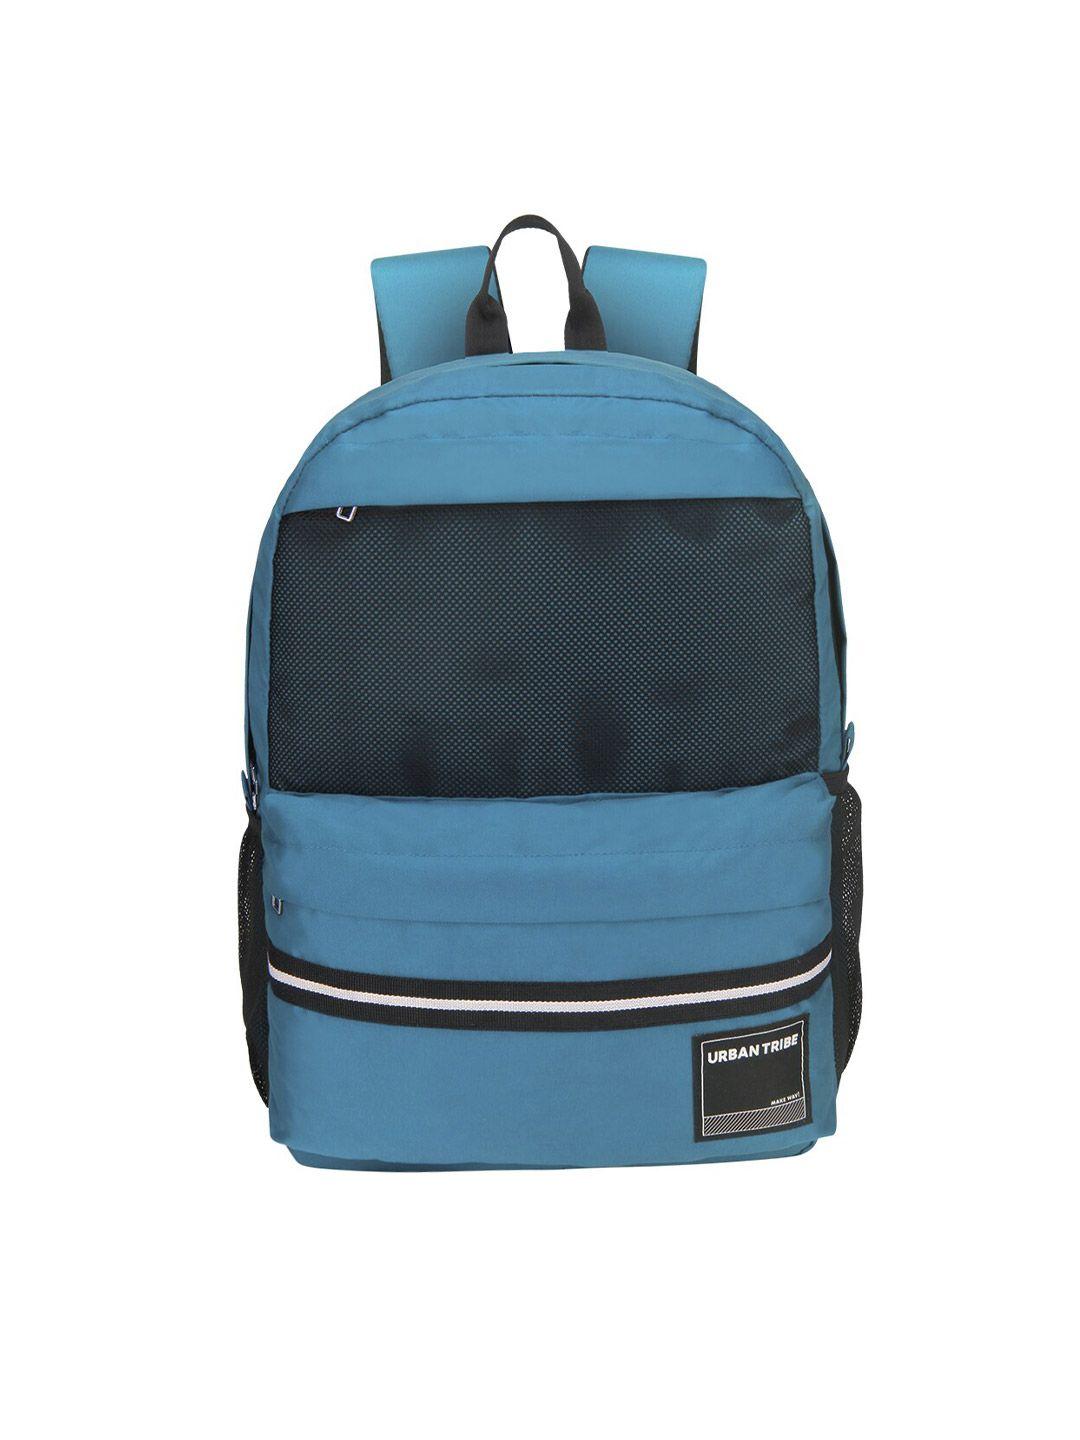 urban tribe padded laptop backpack